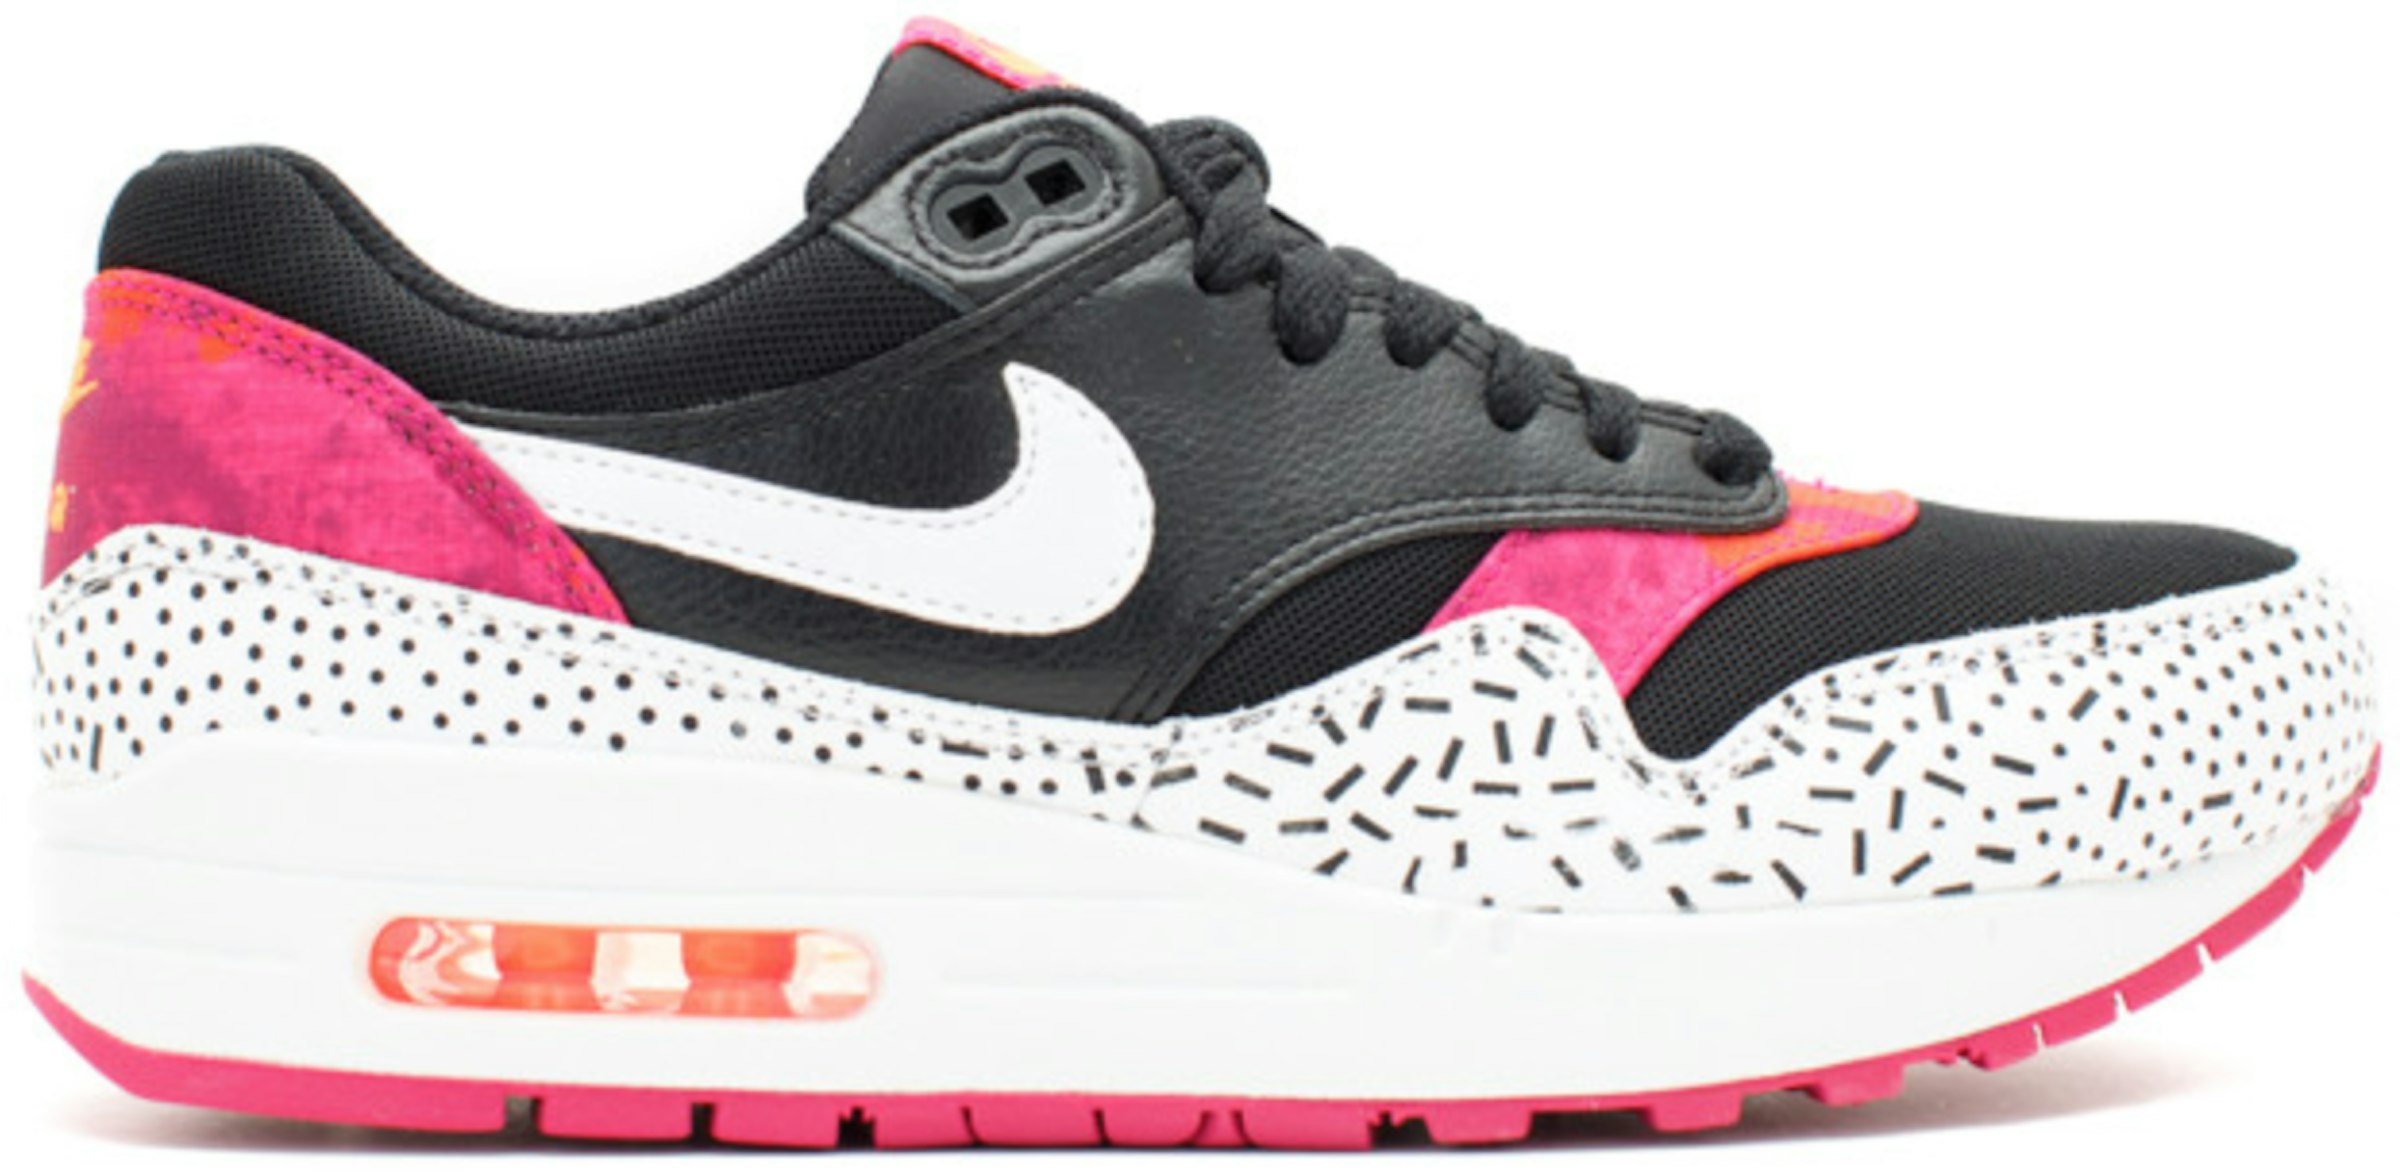 nogmaals Grillig Luchten Nike Air Max 1 Pink Pow Fireberry Men's - 528898-002 - US